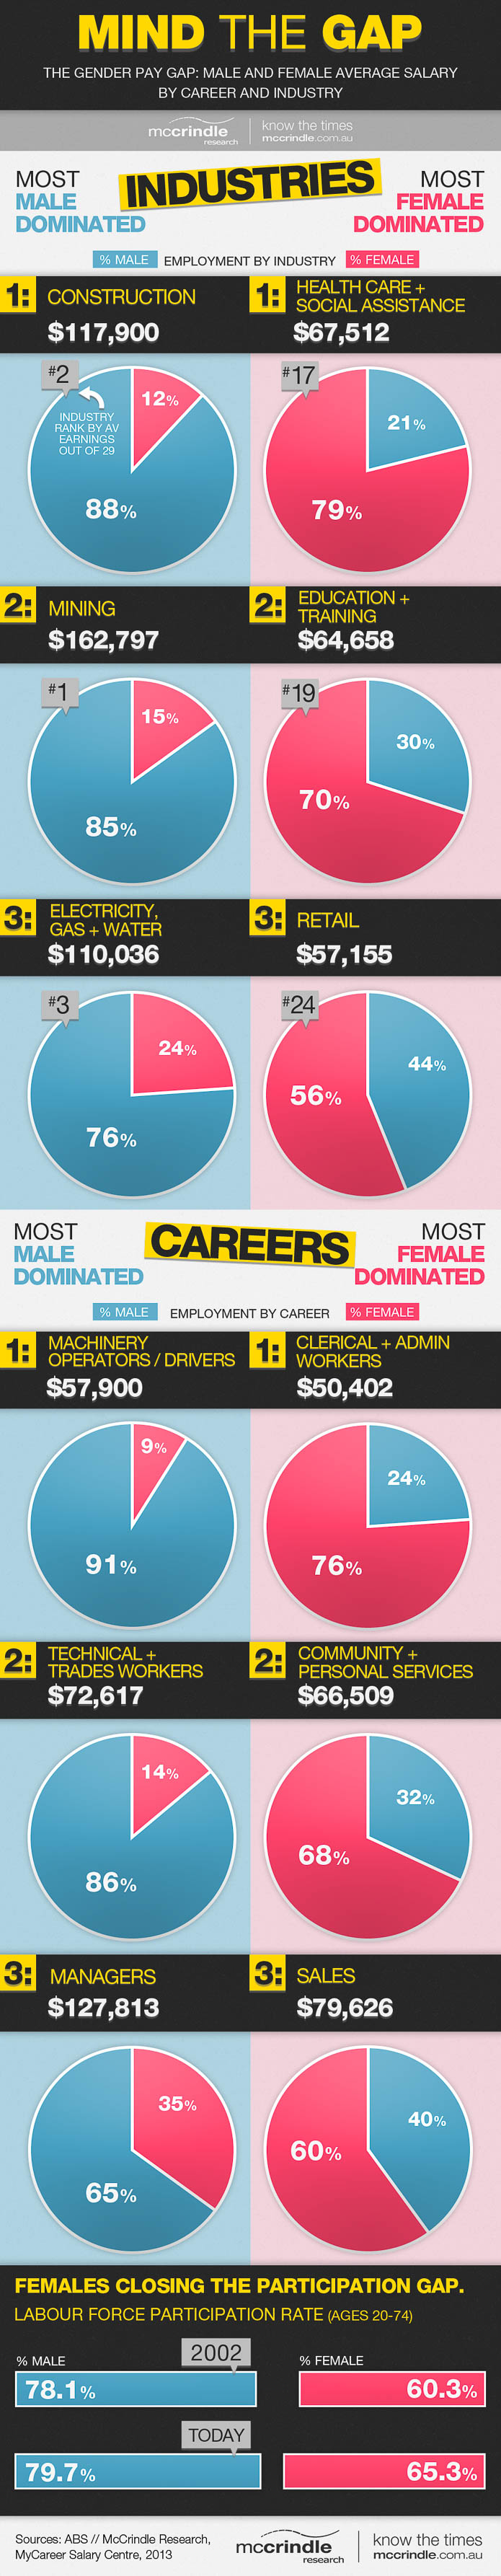 Mind the Gap | The gender pay gap: Male and female salary by career and industry infographic | McCrindle Research